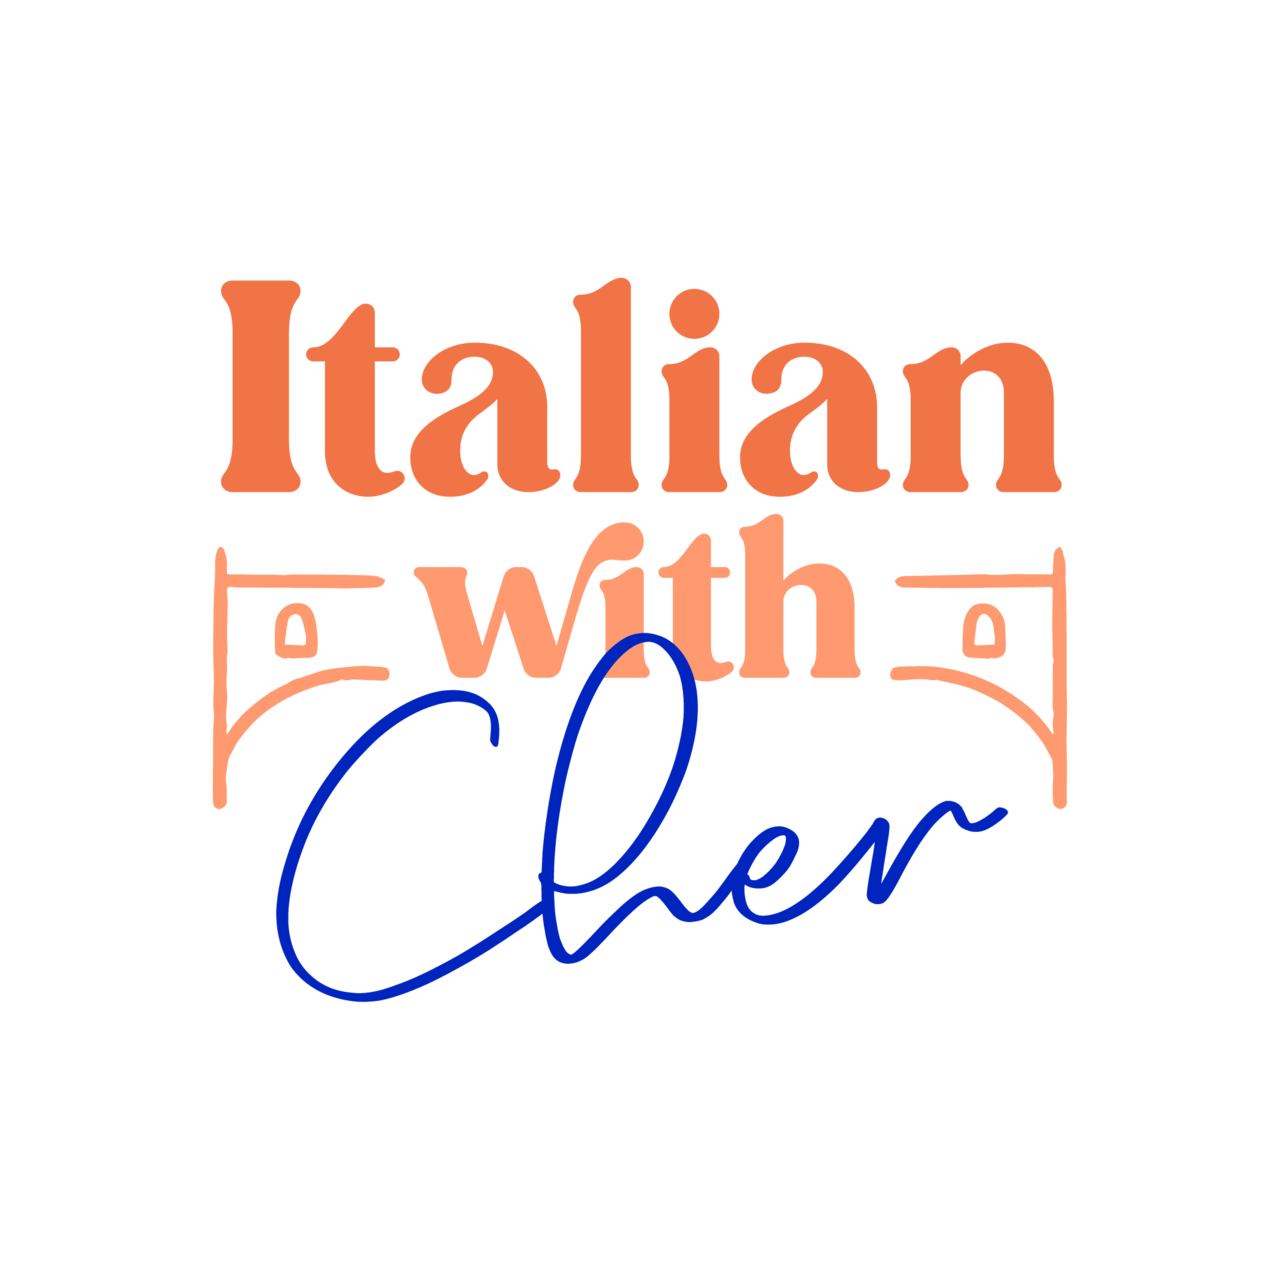 Artwork for Italian with Cher